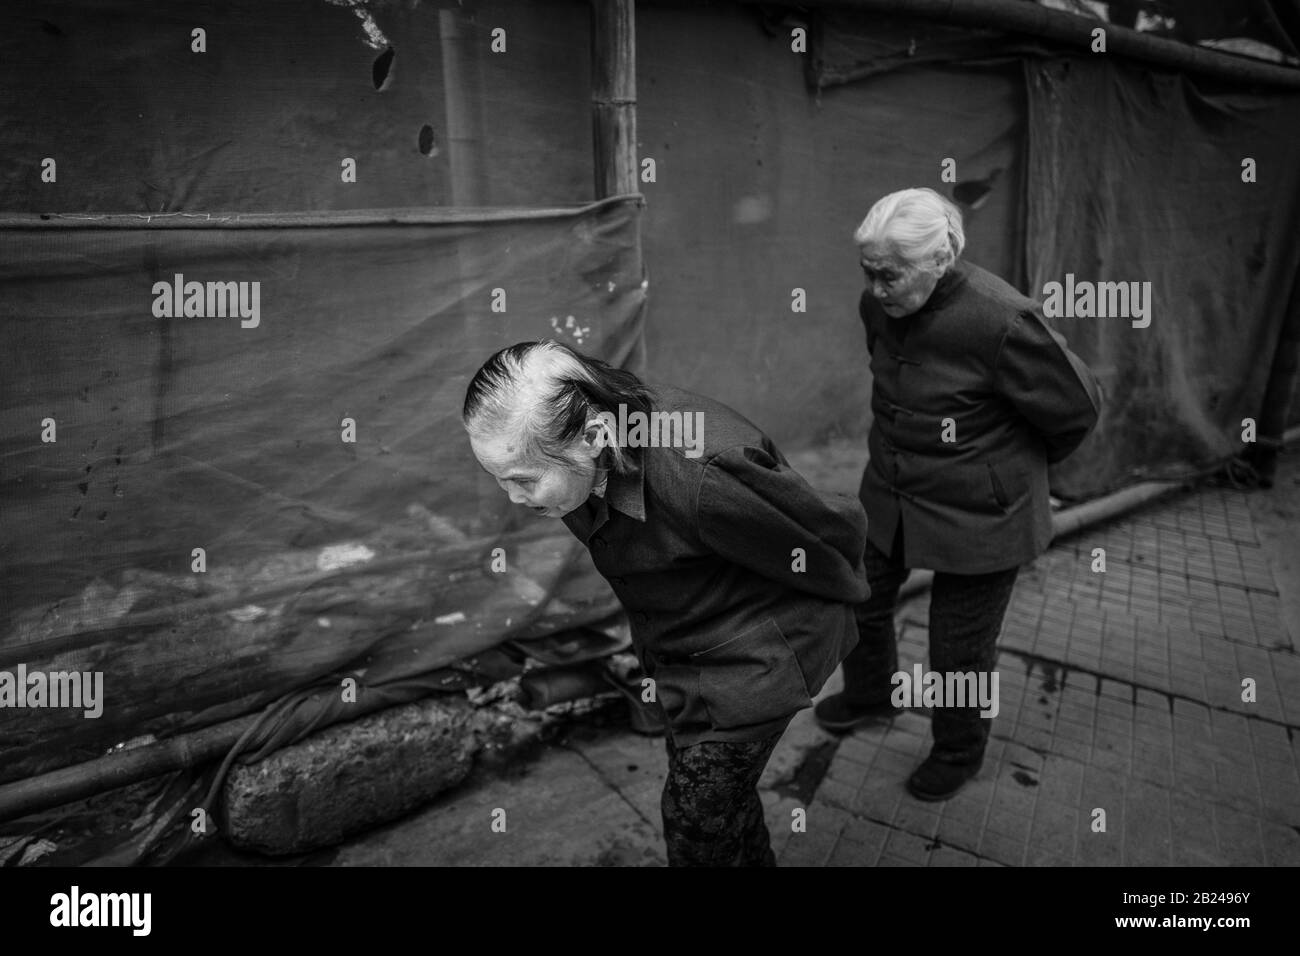 Native To China Black and White Stock Photos & Images - Page 2 - Alamy